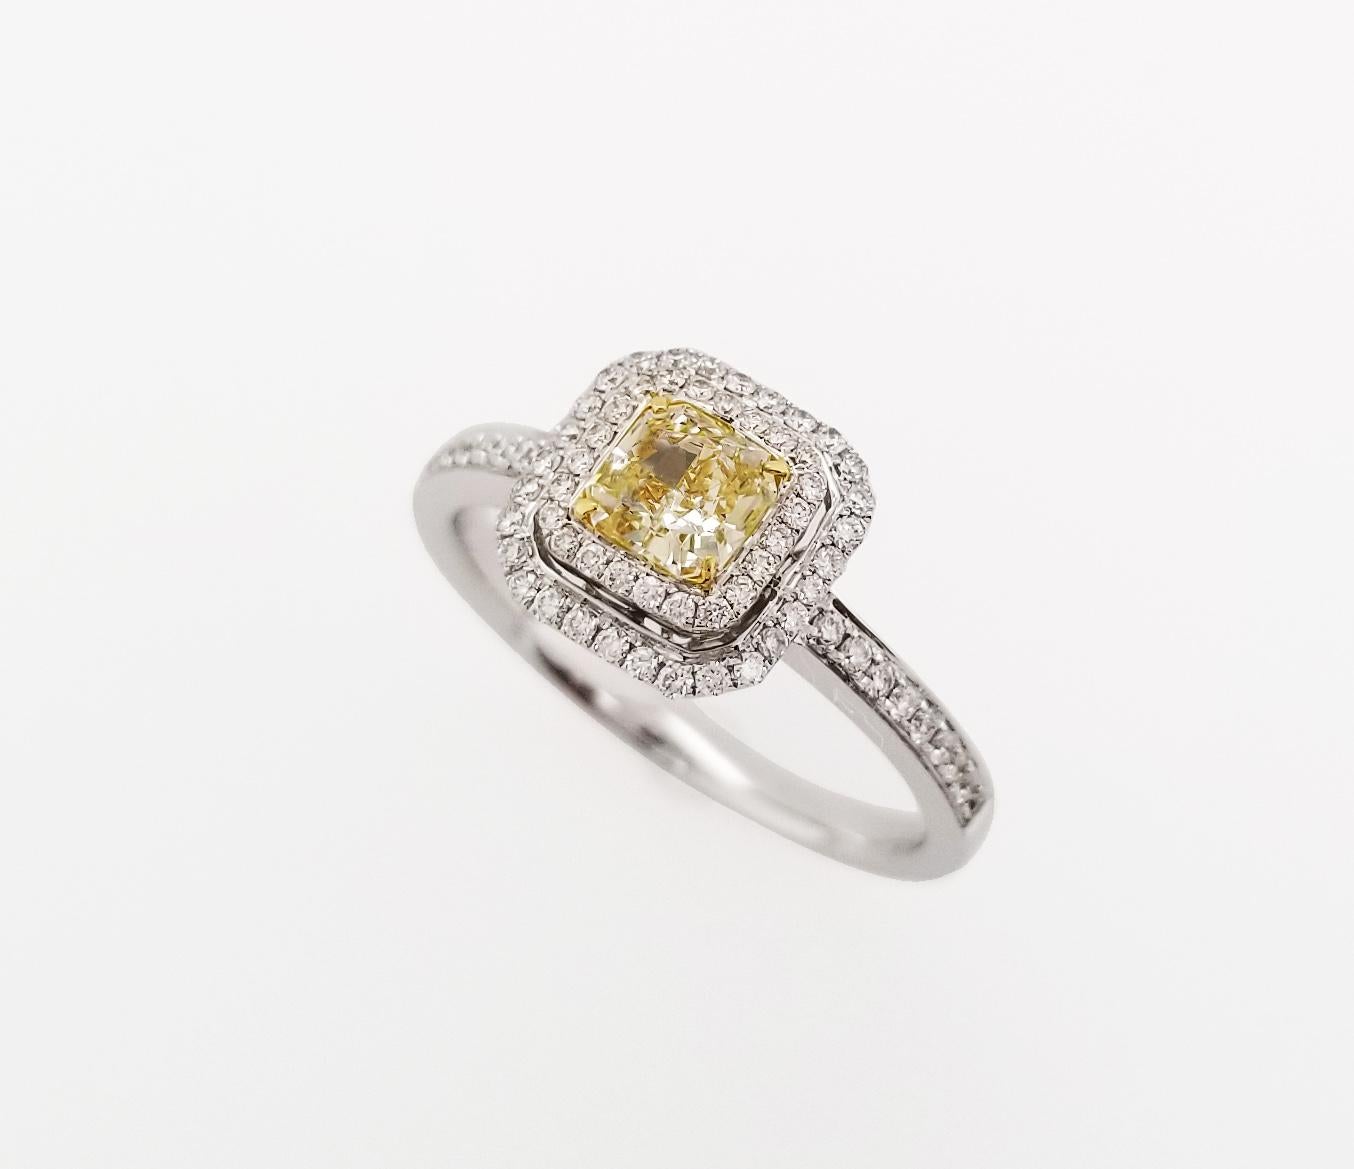 Mother's Day Gift Guide!

A natural 0.52 carat cushion-cut Fancy Light Yellow Diamond Halo Ring on an 18k White Gold band, featuring two rows of round-brilliant white diamonds. All diamonds are GIA-Certified and the total carat weight of the white